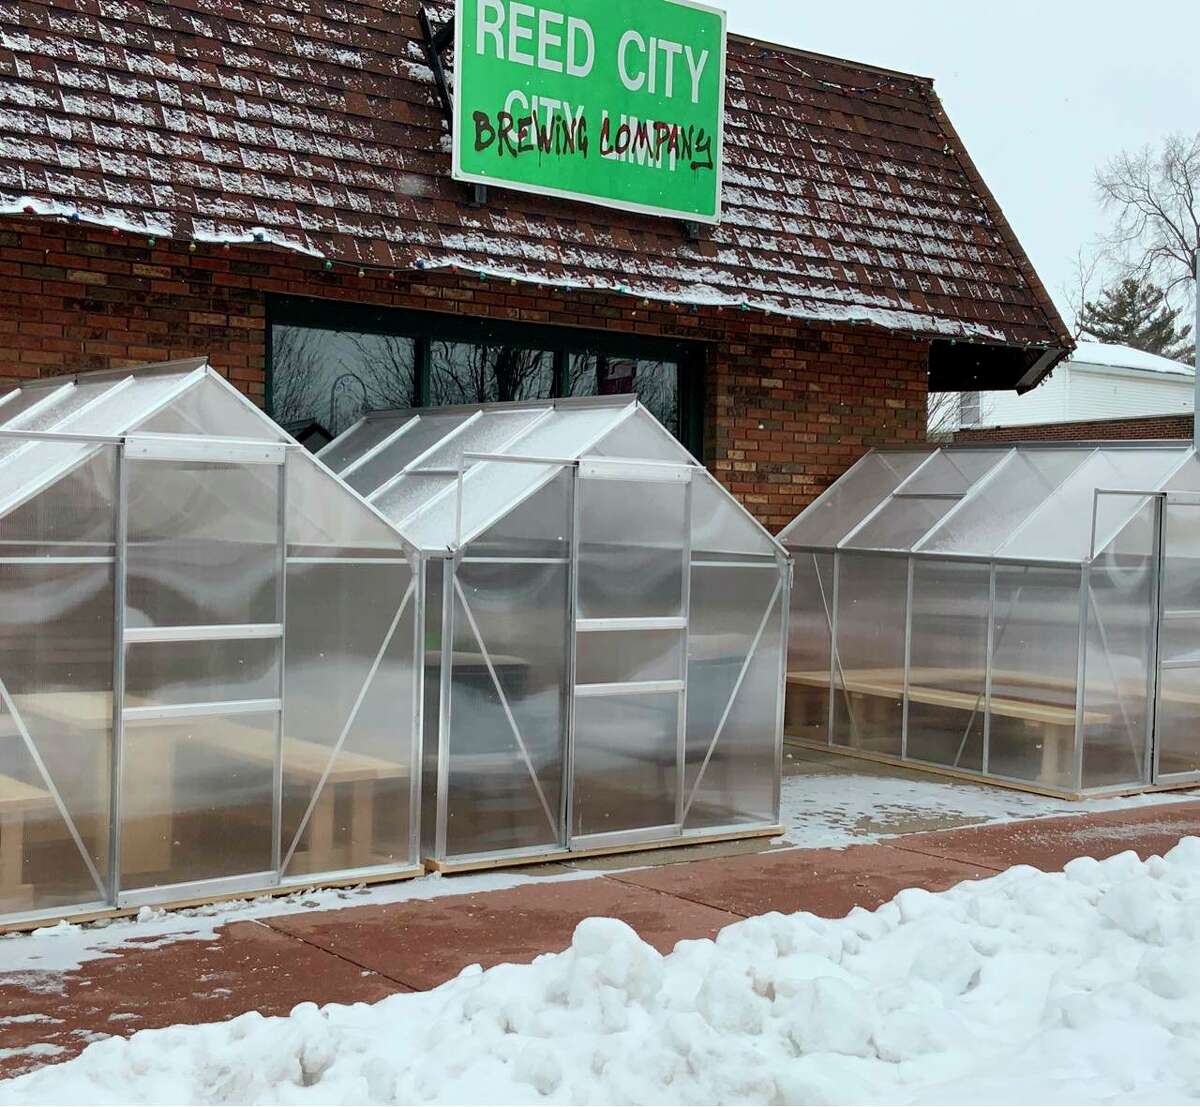 Reed City Brewing has been sustaining business amid the COVID-19 restrictions by adding outdoor beer sheds and offering curbside takeout. Owner of the business Deanna Murphy said she was relieved to see the capacity increased to 50%, but will continue to offer all options for customers. (Courtesy photo)